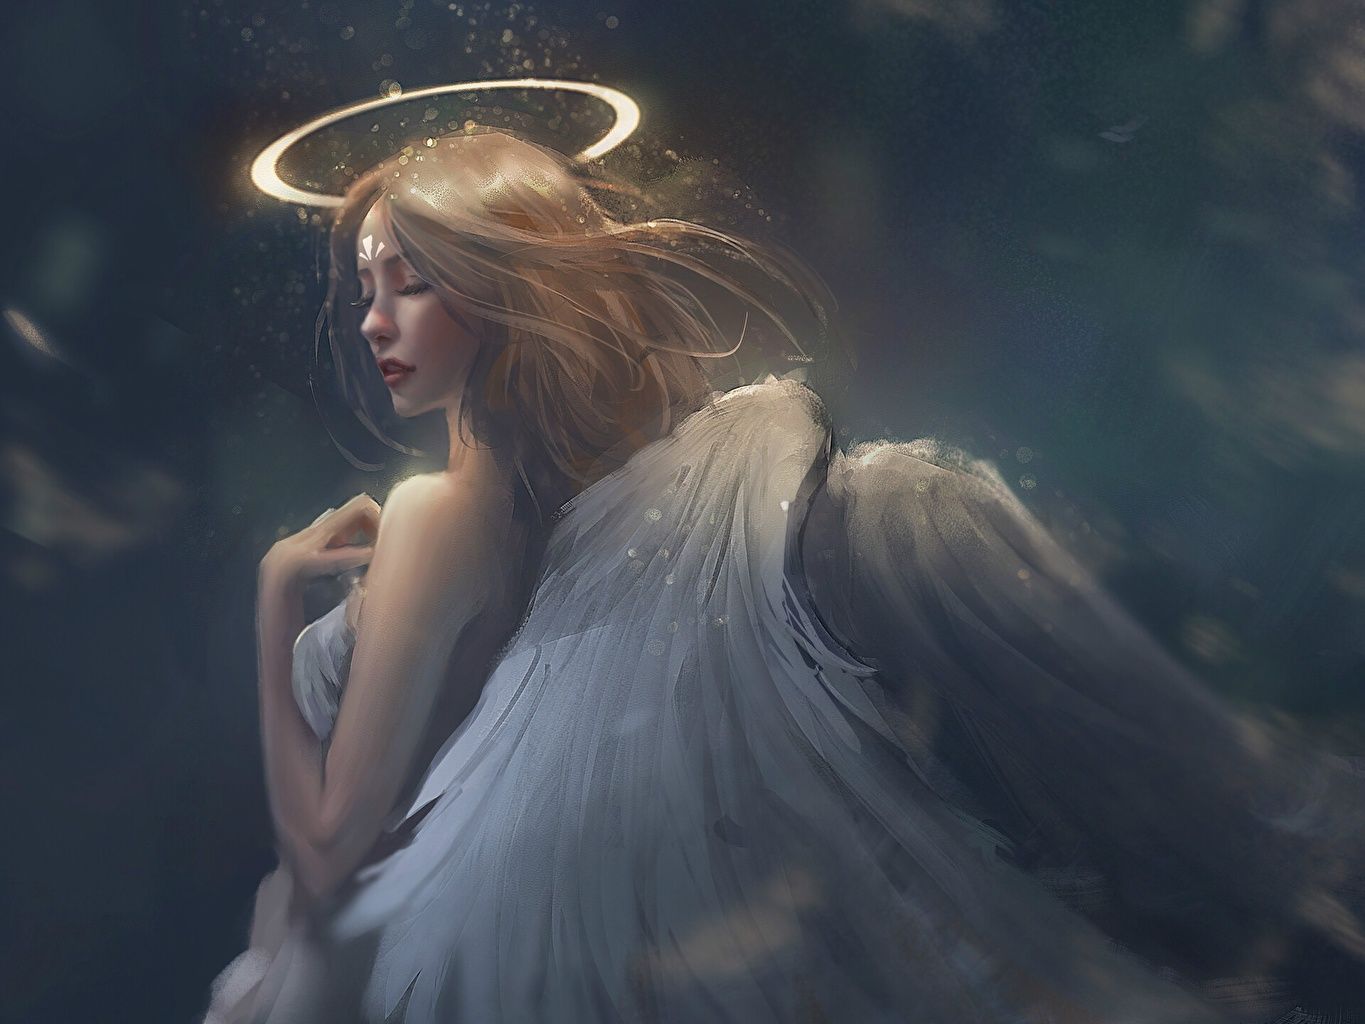 Angels Videos: Download 185+ Free 4K & HD Stock Footage Clips - Pixabay